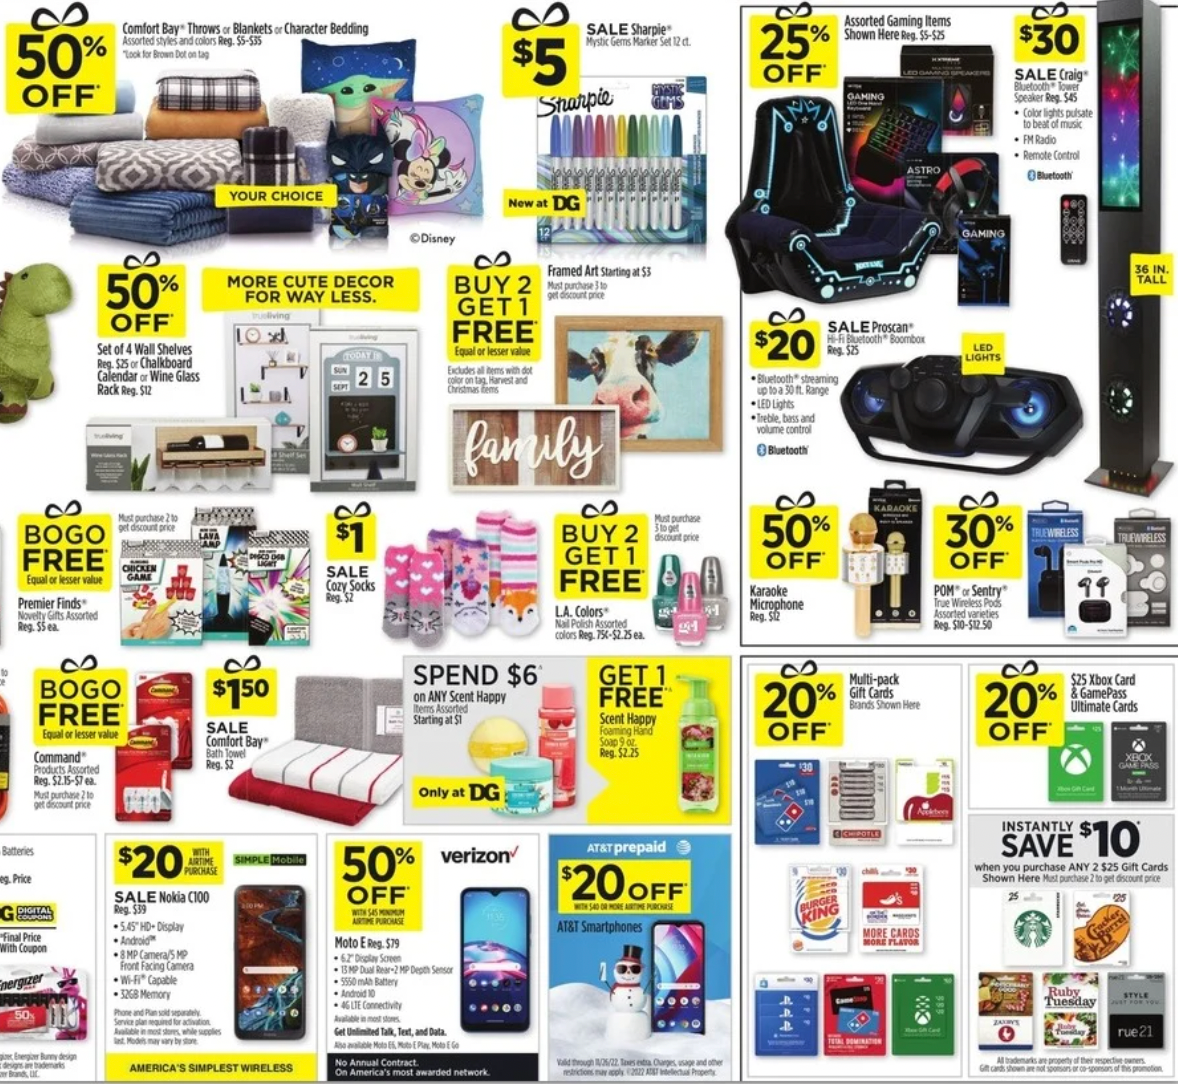 As in previous years, Dollar General will offer discounts on PlayStation and Xbox gift cards during Black Friday 2022.